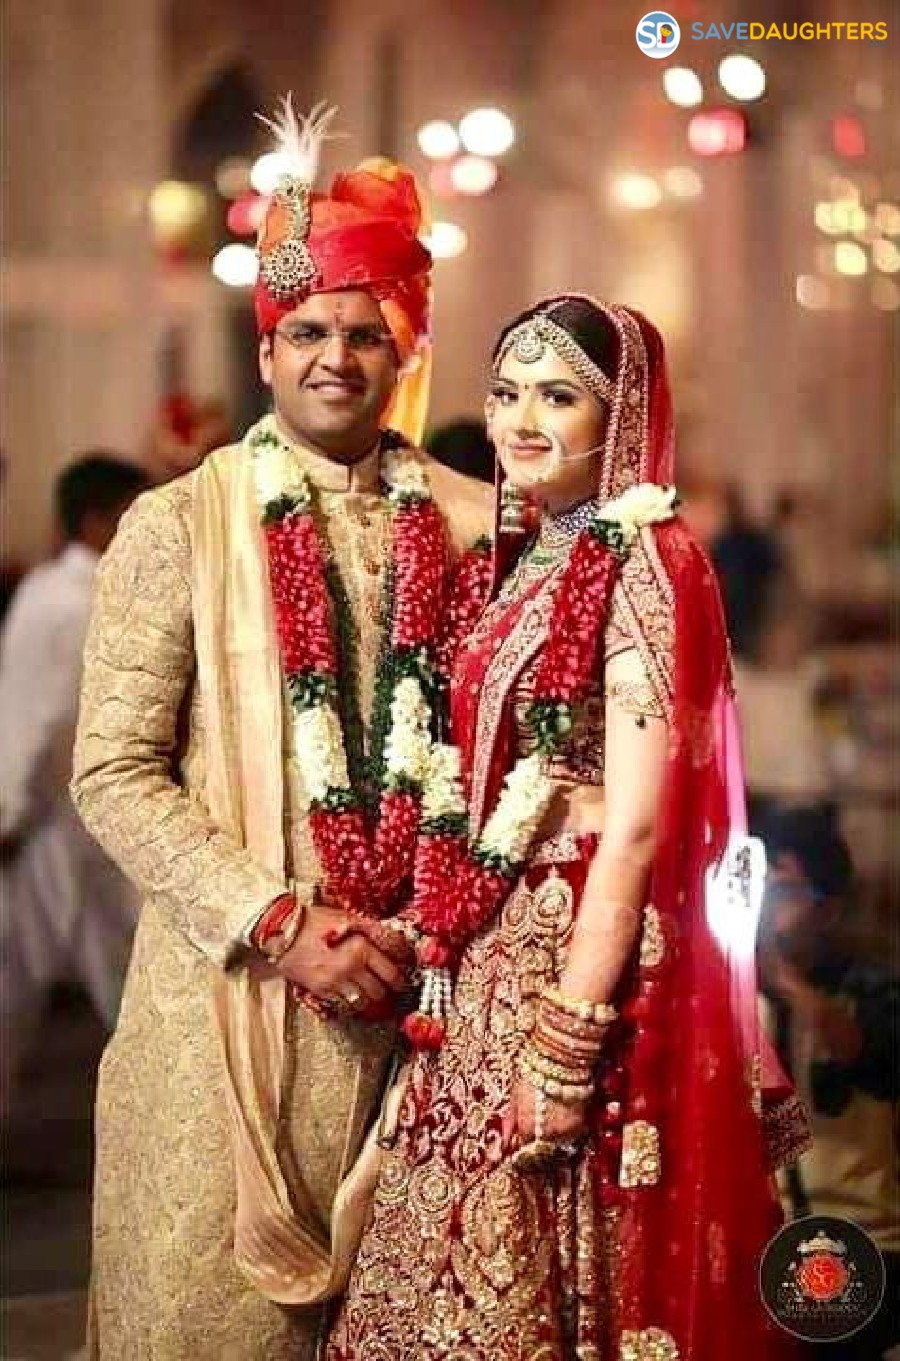 Is Dushyant Chautala Married